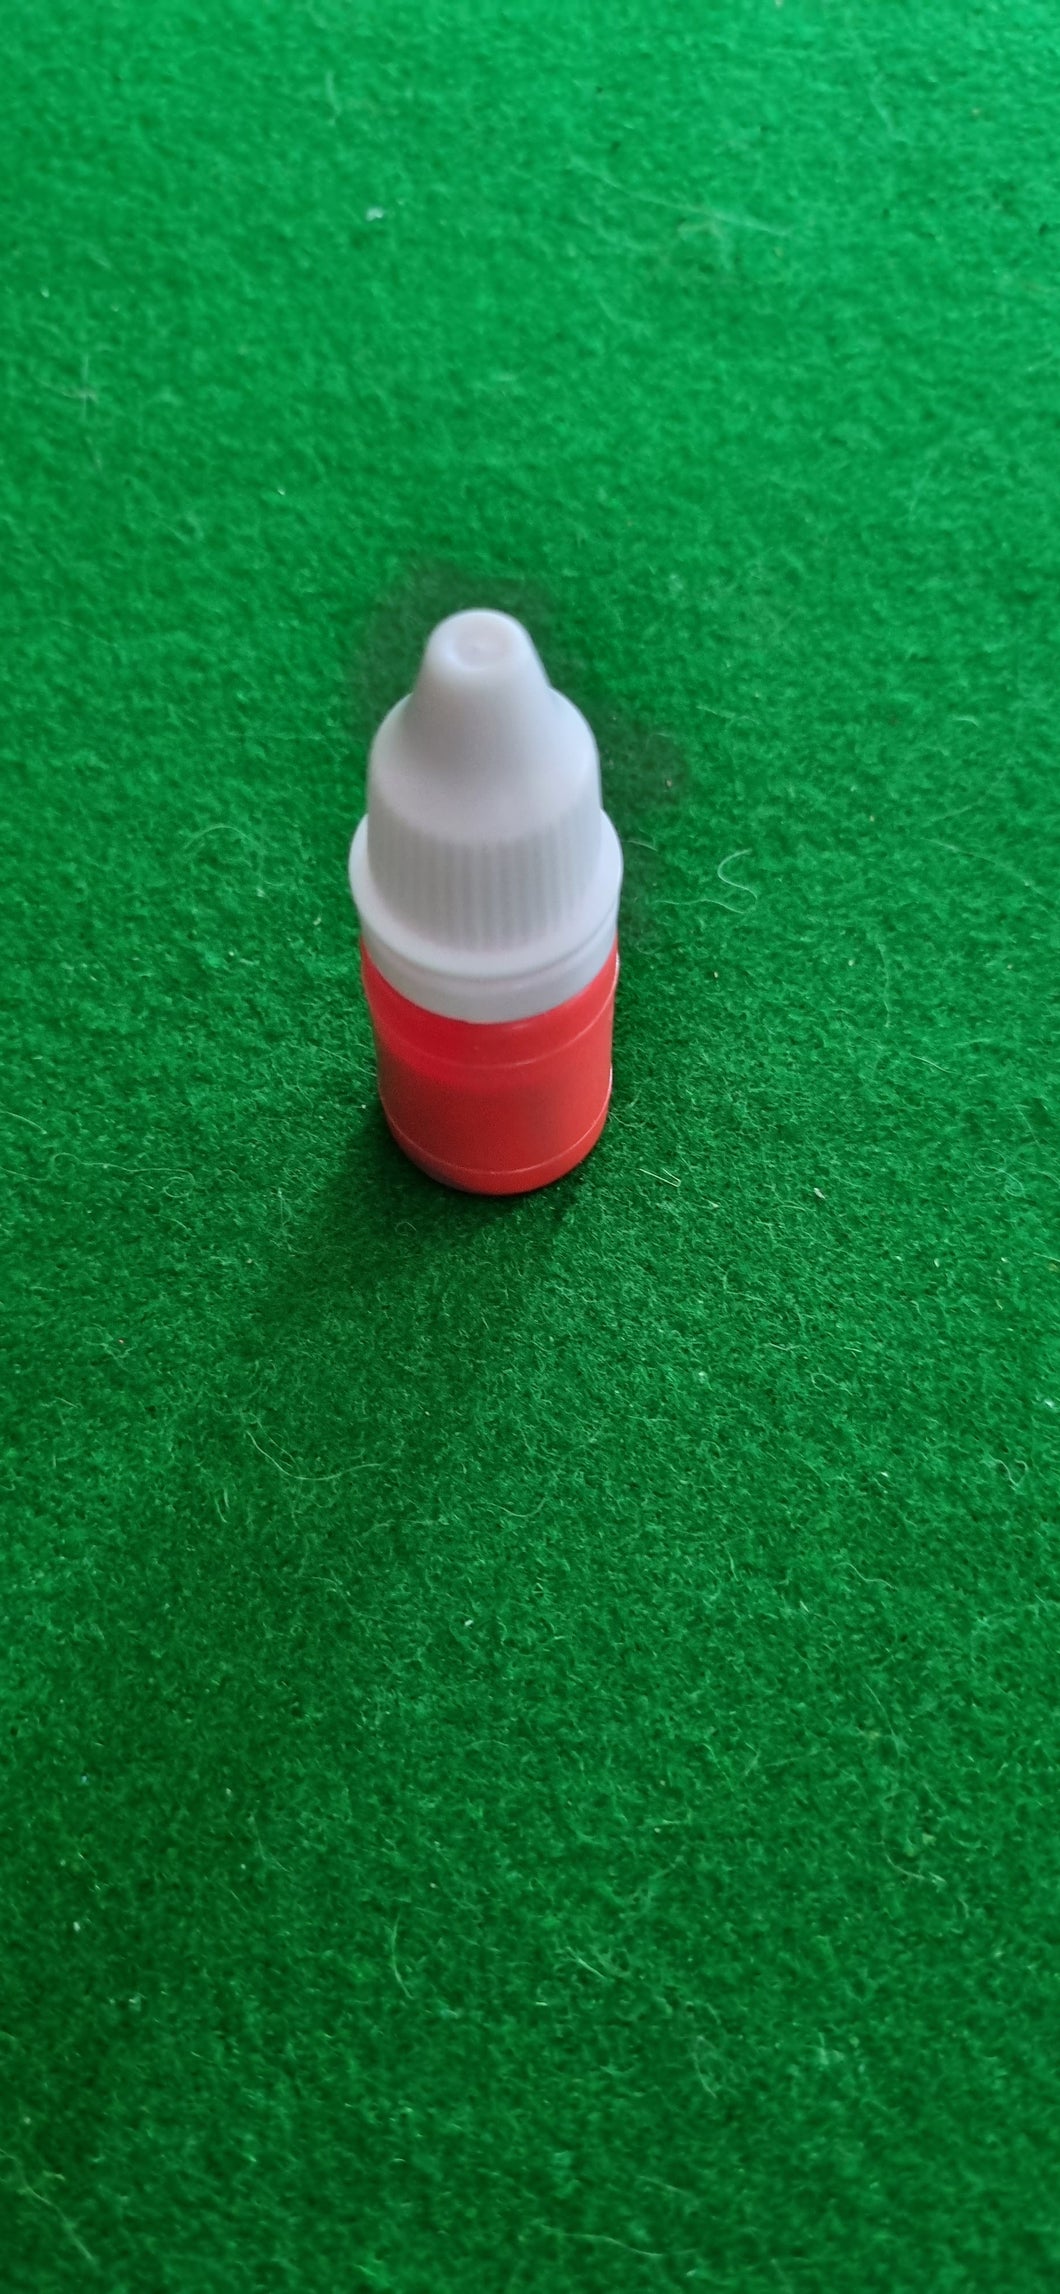 Refill Ink for Golf Ball Stamp - Red